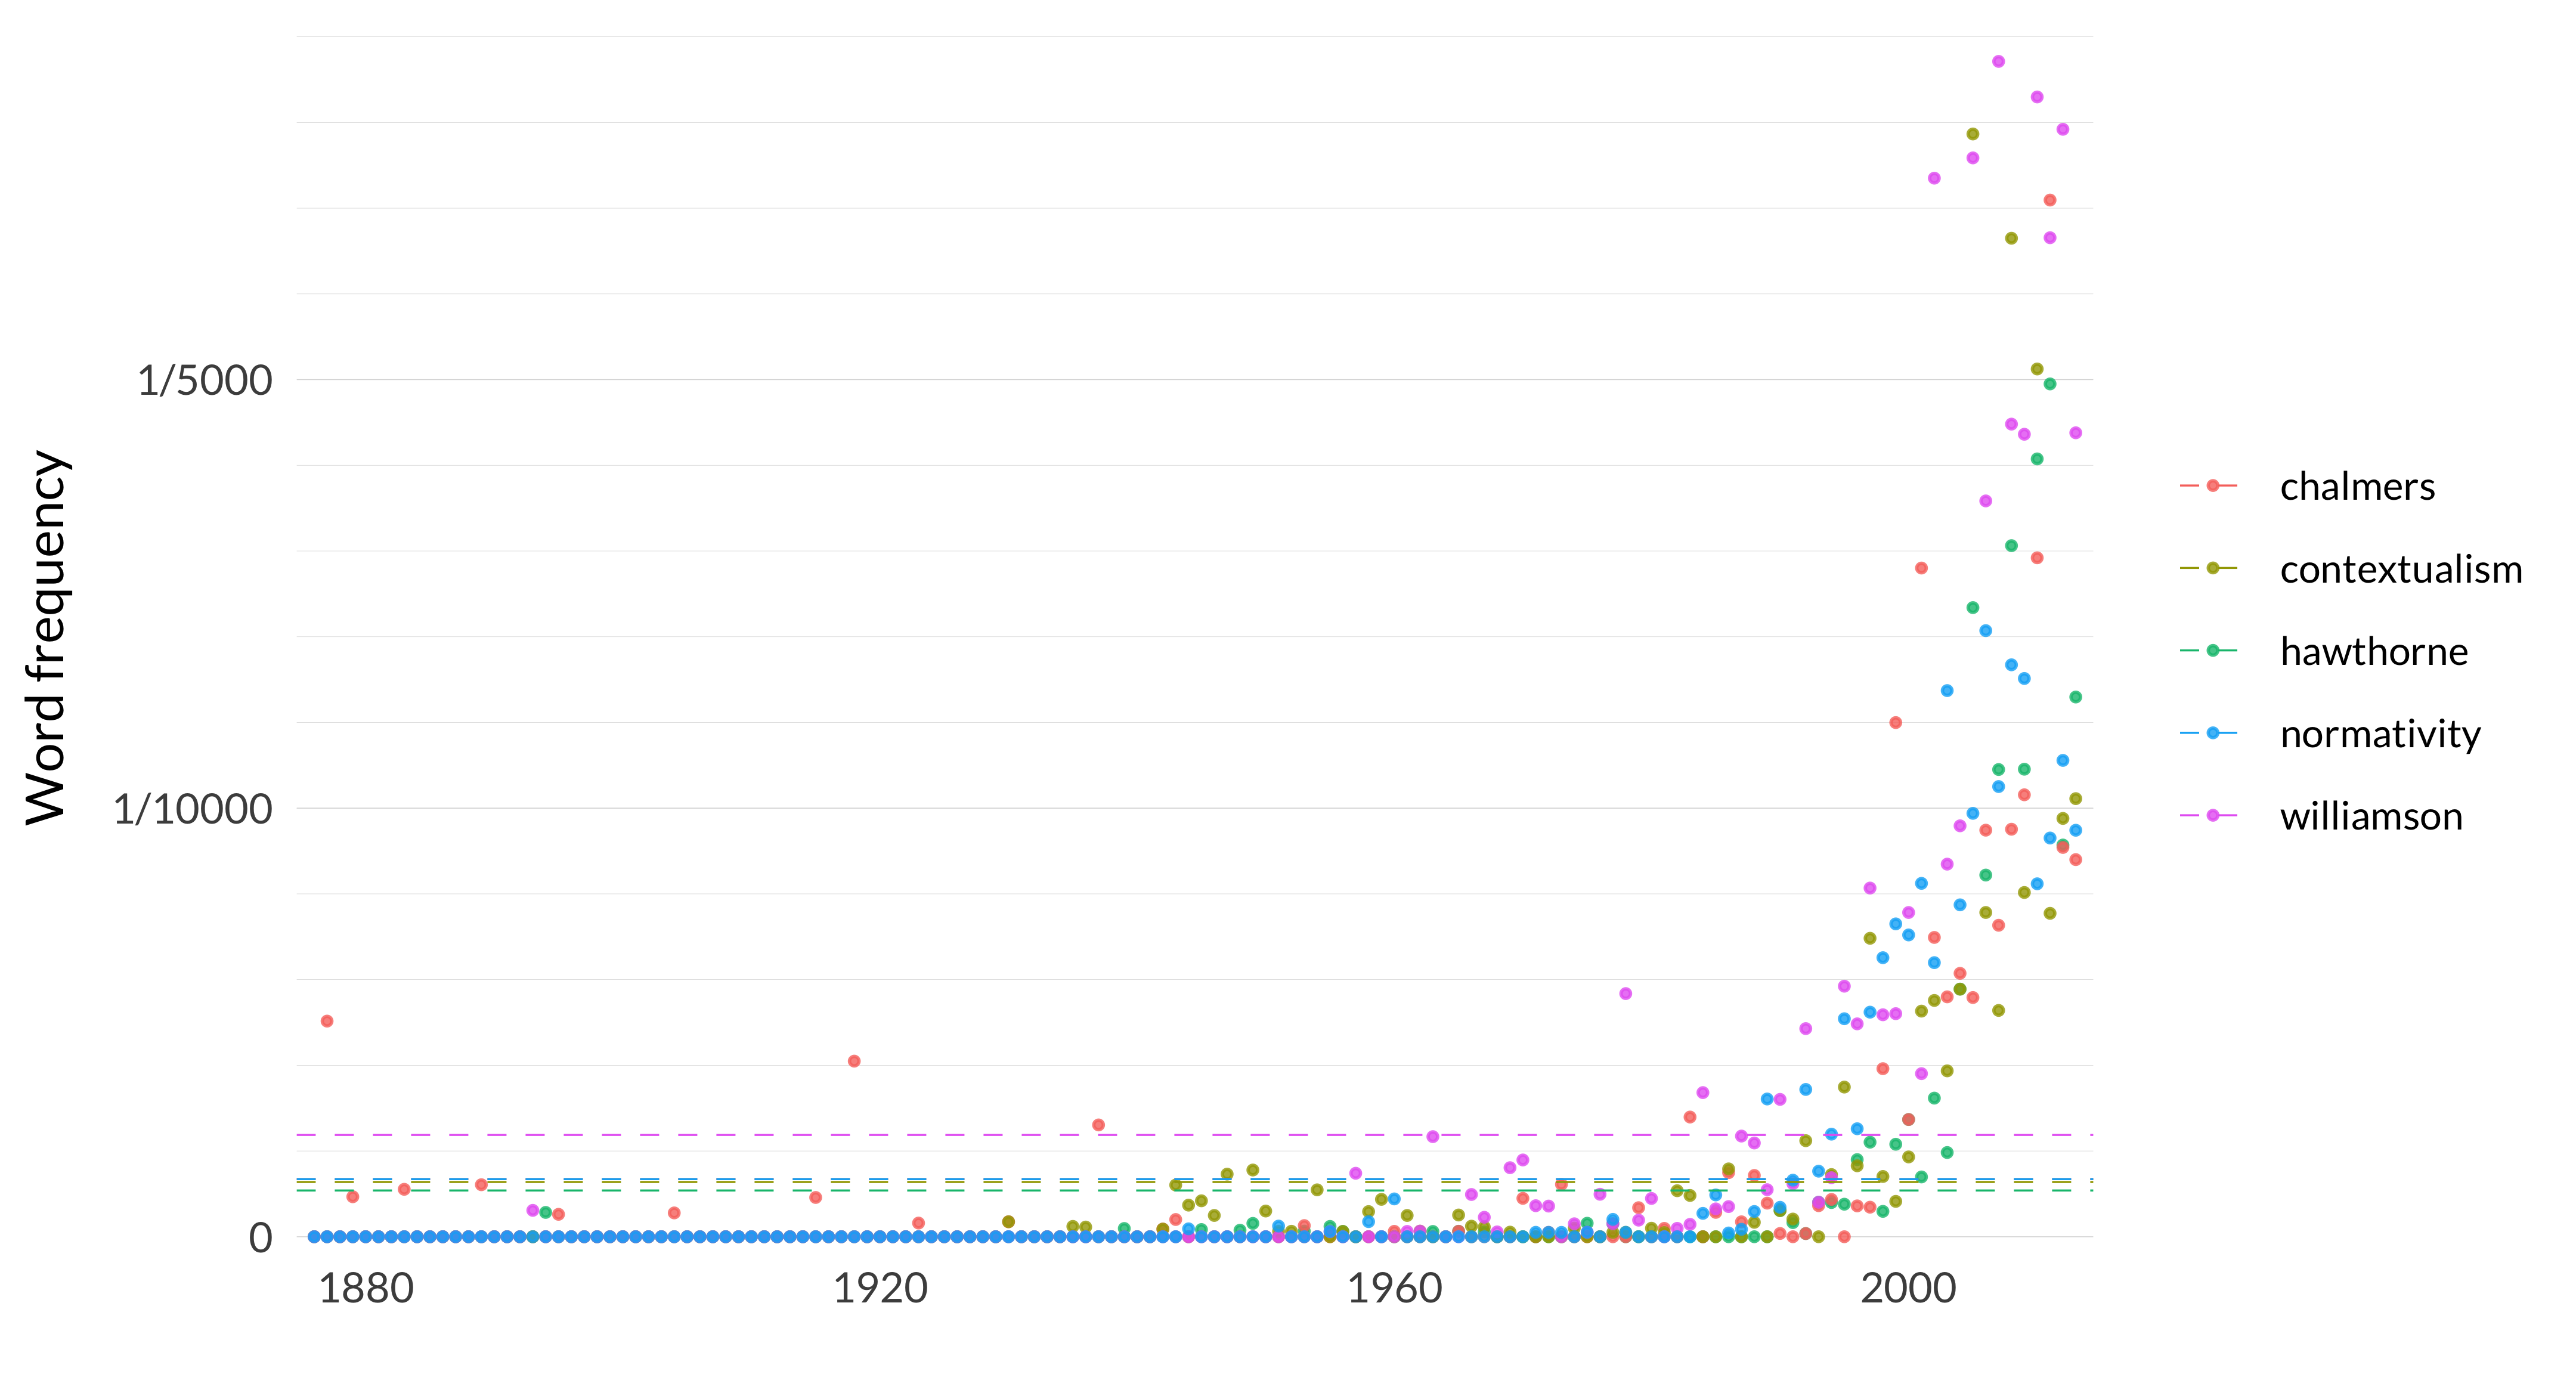 A scatterplot showing the frequency of the words hawthorne, chalmers, contextualism, williamson, normativity. The word hawthorne appears, on average across the years, 11 times per million words, and in the median year, it appears 0 times per million words. Its most frequent occurrence is in 2011 when it appears 199 times per million words, and its least frequent occurrence is in 1876 when it appears 0 times per million words. The word chalmers appears, on average across the years, 13 times per million words, and in the median year, it appears 0 times per million words. Its most frequent occurrence is in 2011 when it appears 242 times per million words, and its least frequent occurrence is in 1876 when it appears 0 times per million words. The word contextualism appears, on average across the years, 13 times per million words, and in the median year, it appears 0 times per million words. Its most frequent occurrence is in 2005 when it appears 257 times per million words, and its least frequent occurrence is in 1876 when it appears 0 times per million words. The word williamson appears, on average across the years, 24 times per million words, and in the median year, it appears 0 times per million words. Its most frequent occurrence is in 2007 when it appears 274 times per million words, and its least frequent occurrence is in 1876 when it appears 0 times per million words. The word normativity appears, on average across the years, 13 times per million words, and in the median year, it appears 0 times per million words. Its most frequent occurrence is in 2006 when it appears 141 times per million words, and its least frequent occurrence is in 1876 when it appears 0 times per million words. 